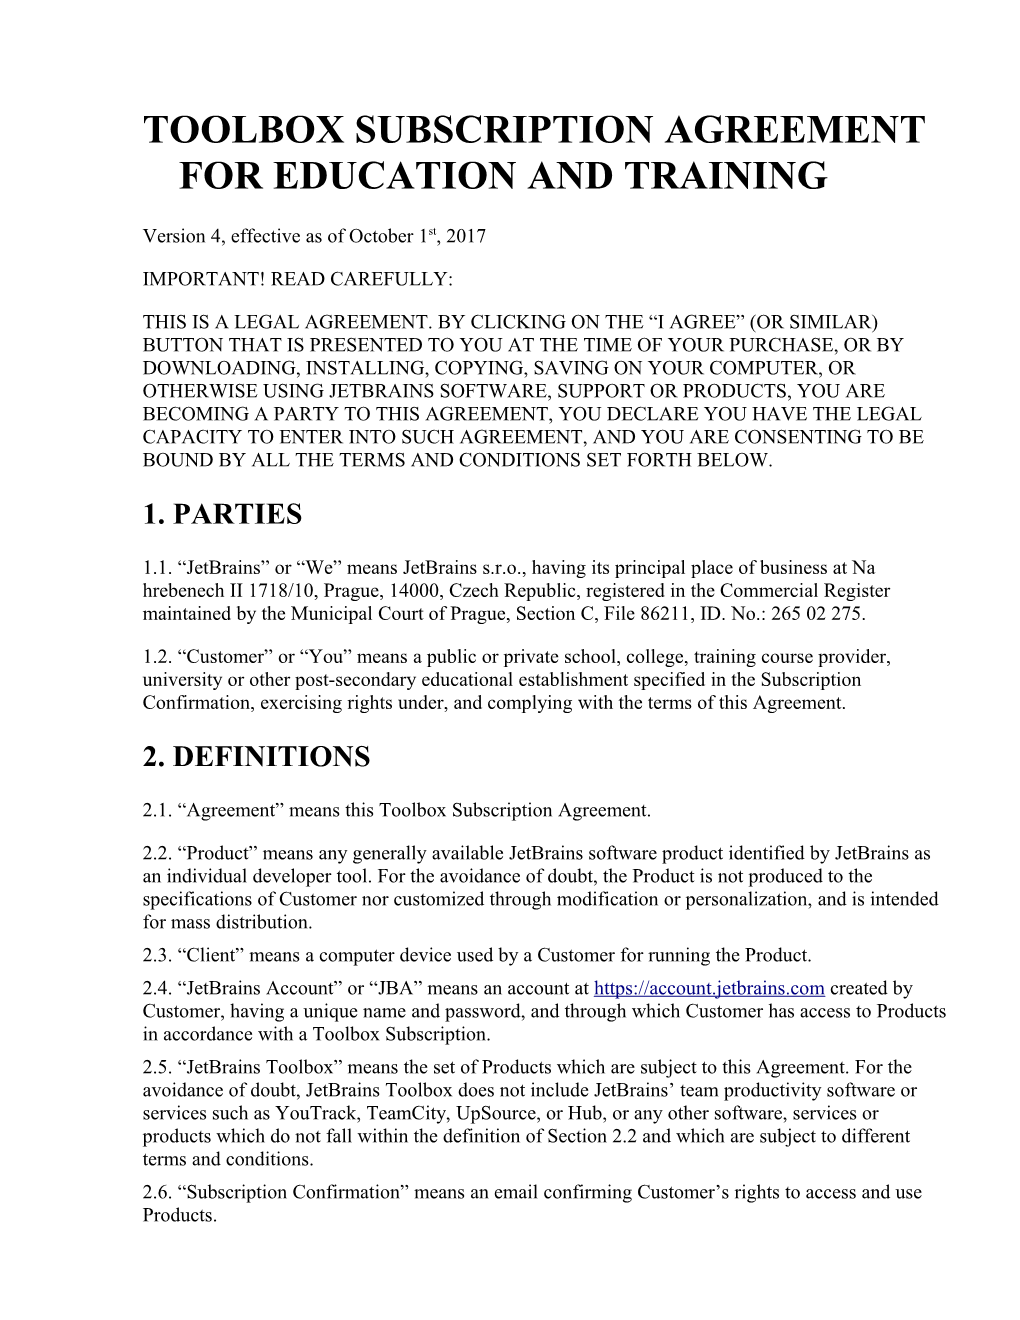 Toolbox Subscription Agreement for Education and Training